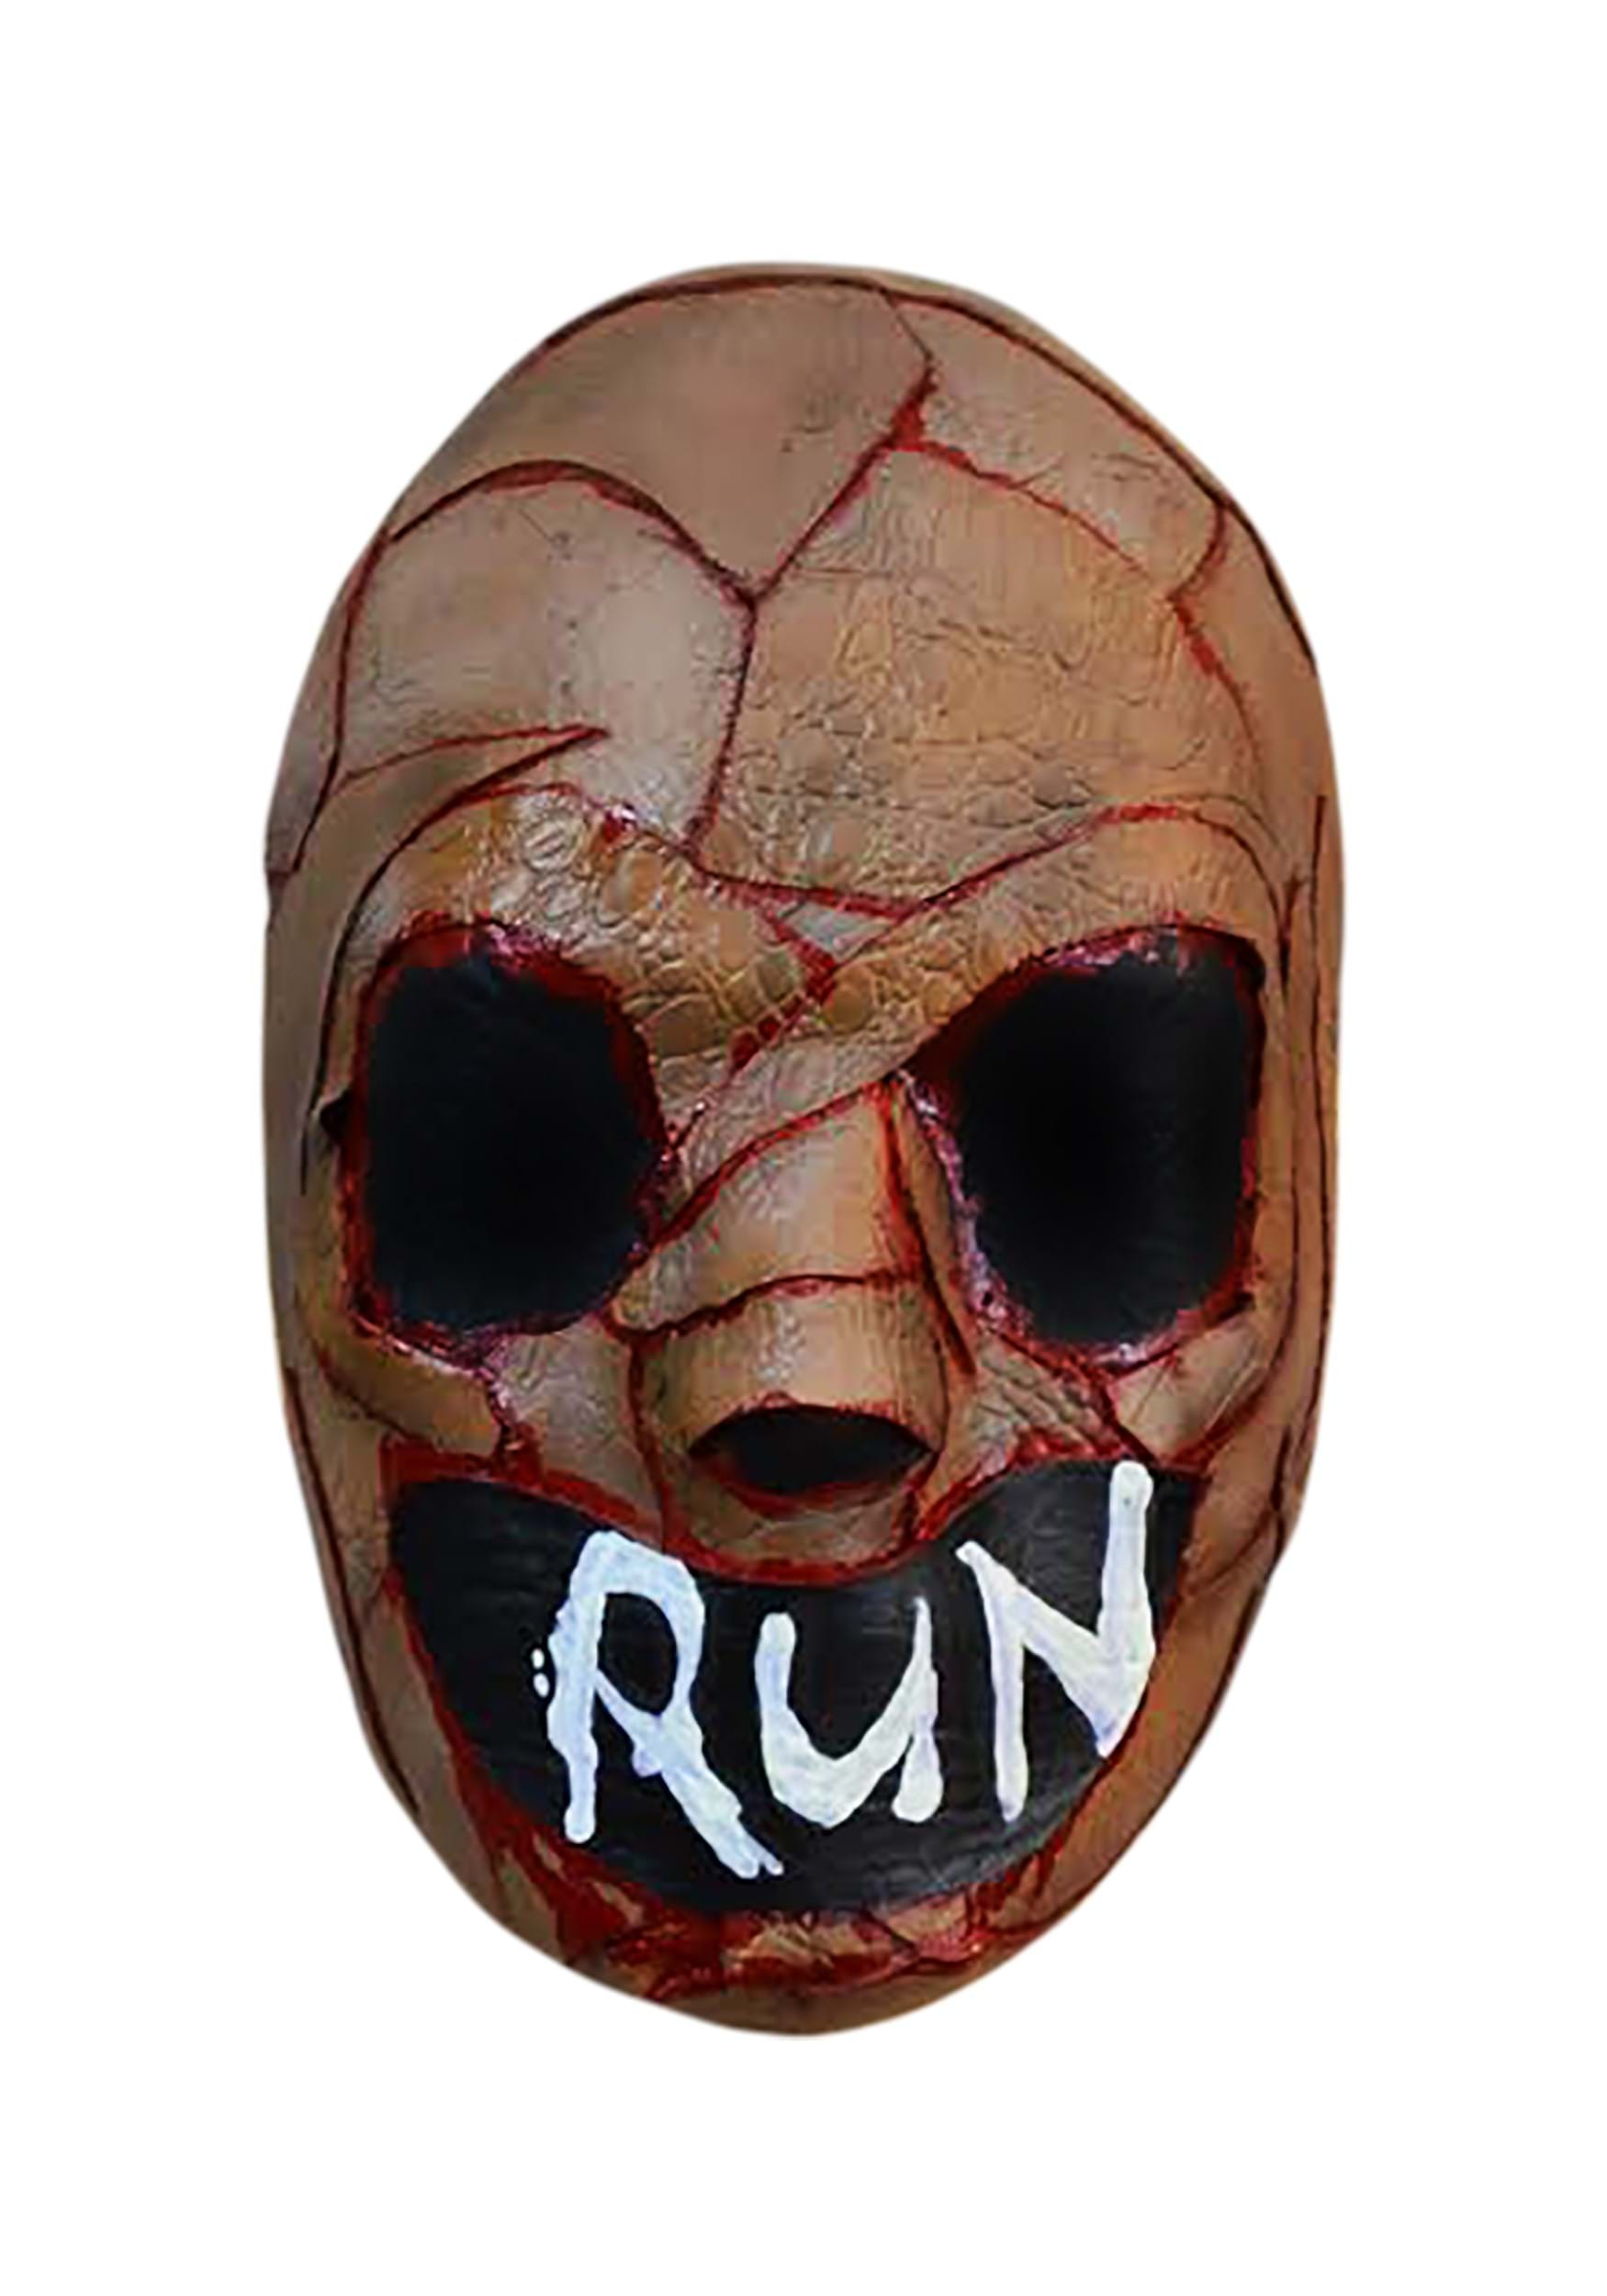 The Purge Run Mask for Adults